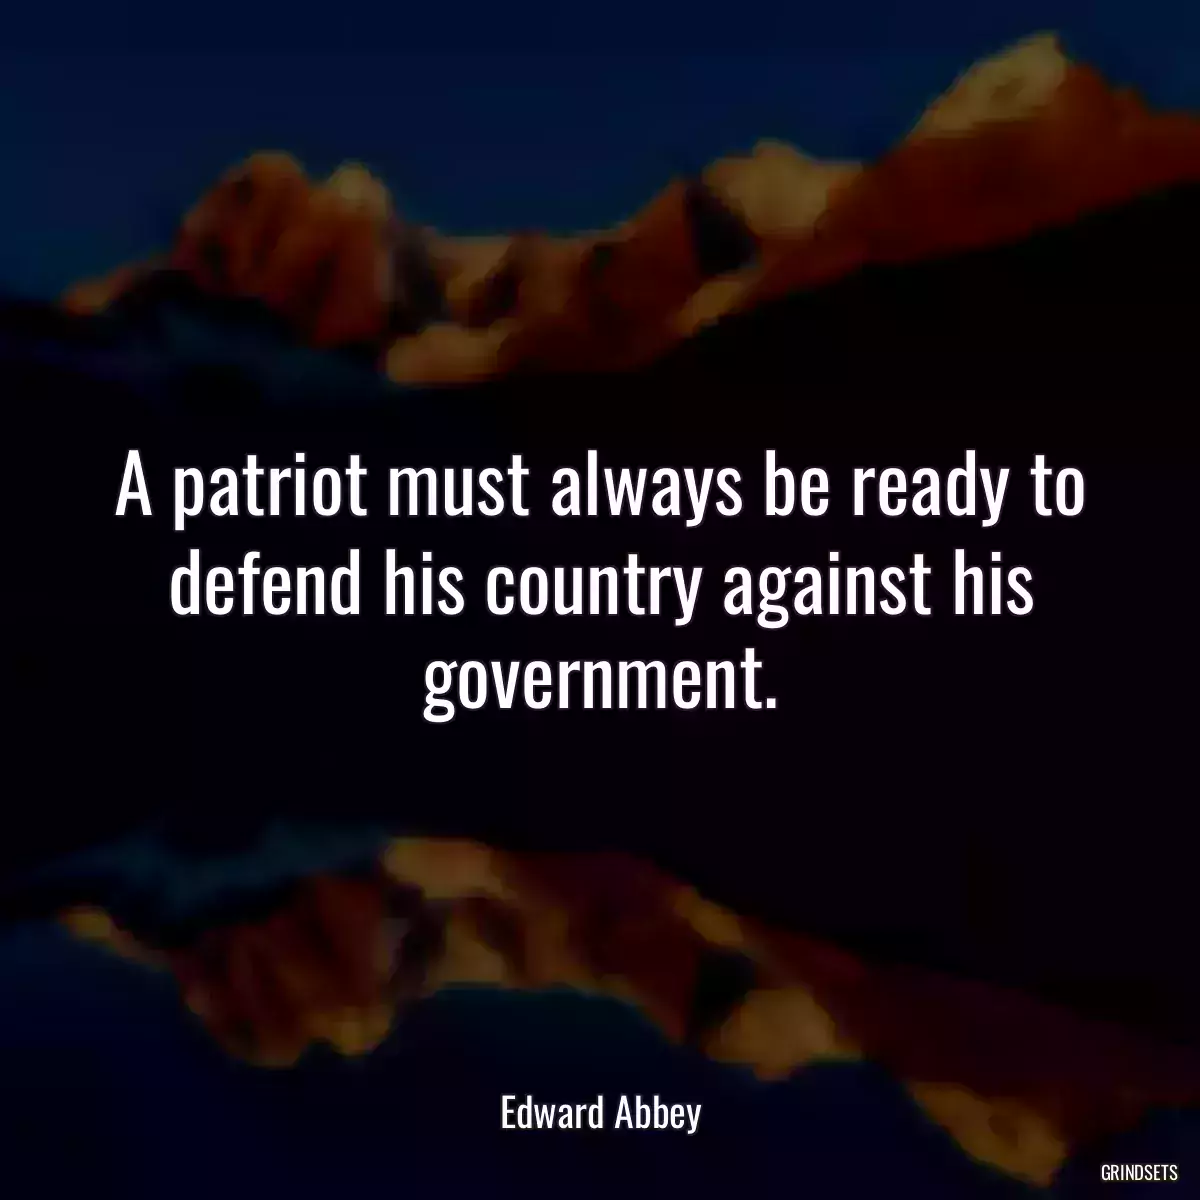 A patriot must always be ready to defend his country against his government.